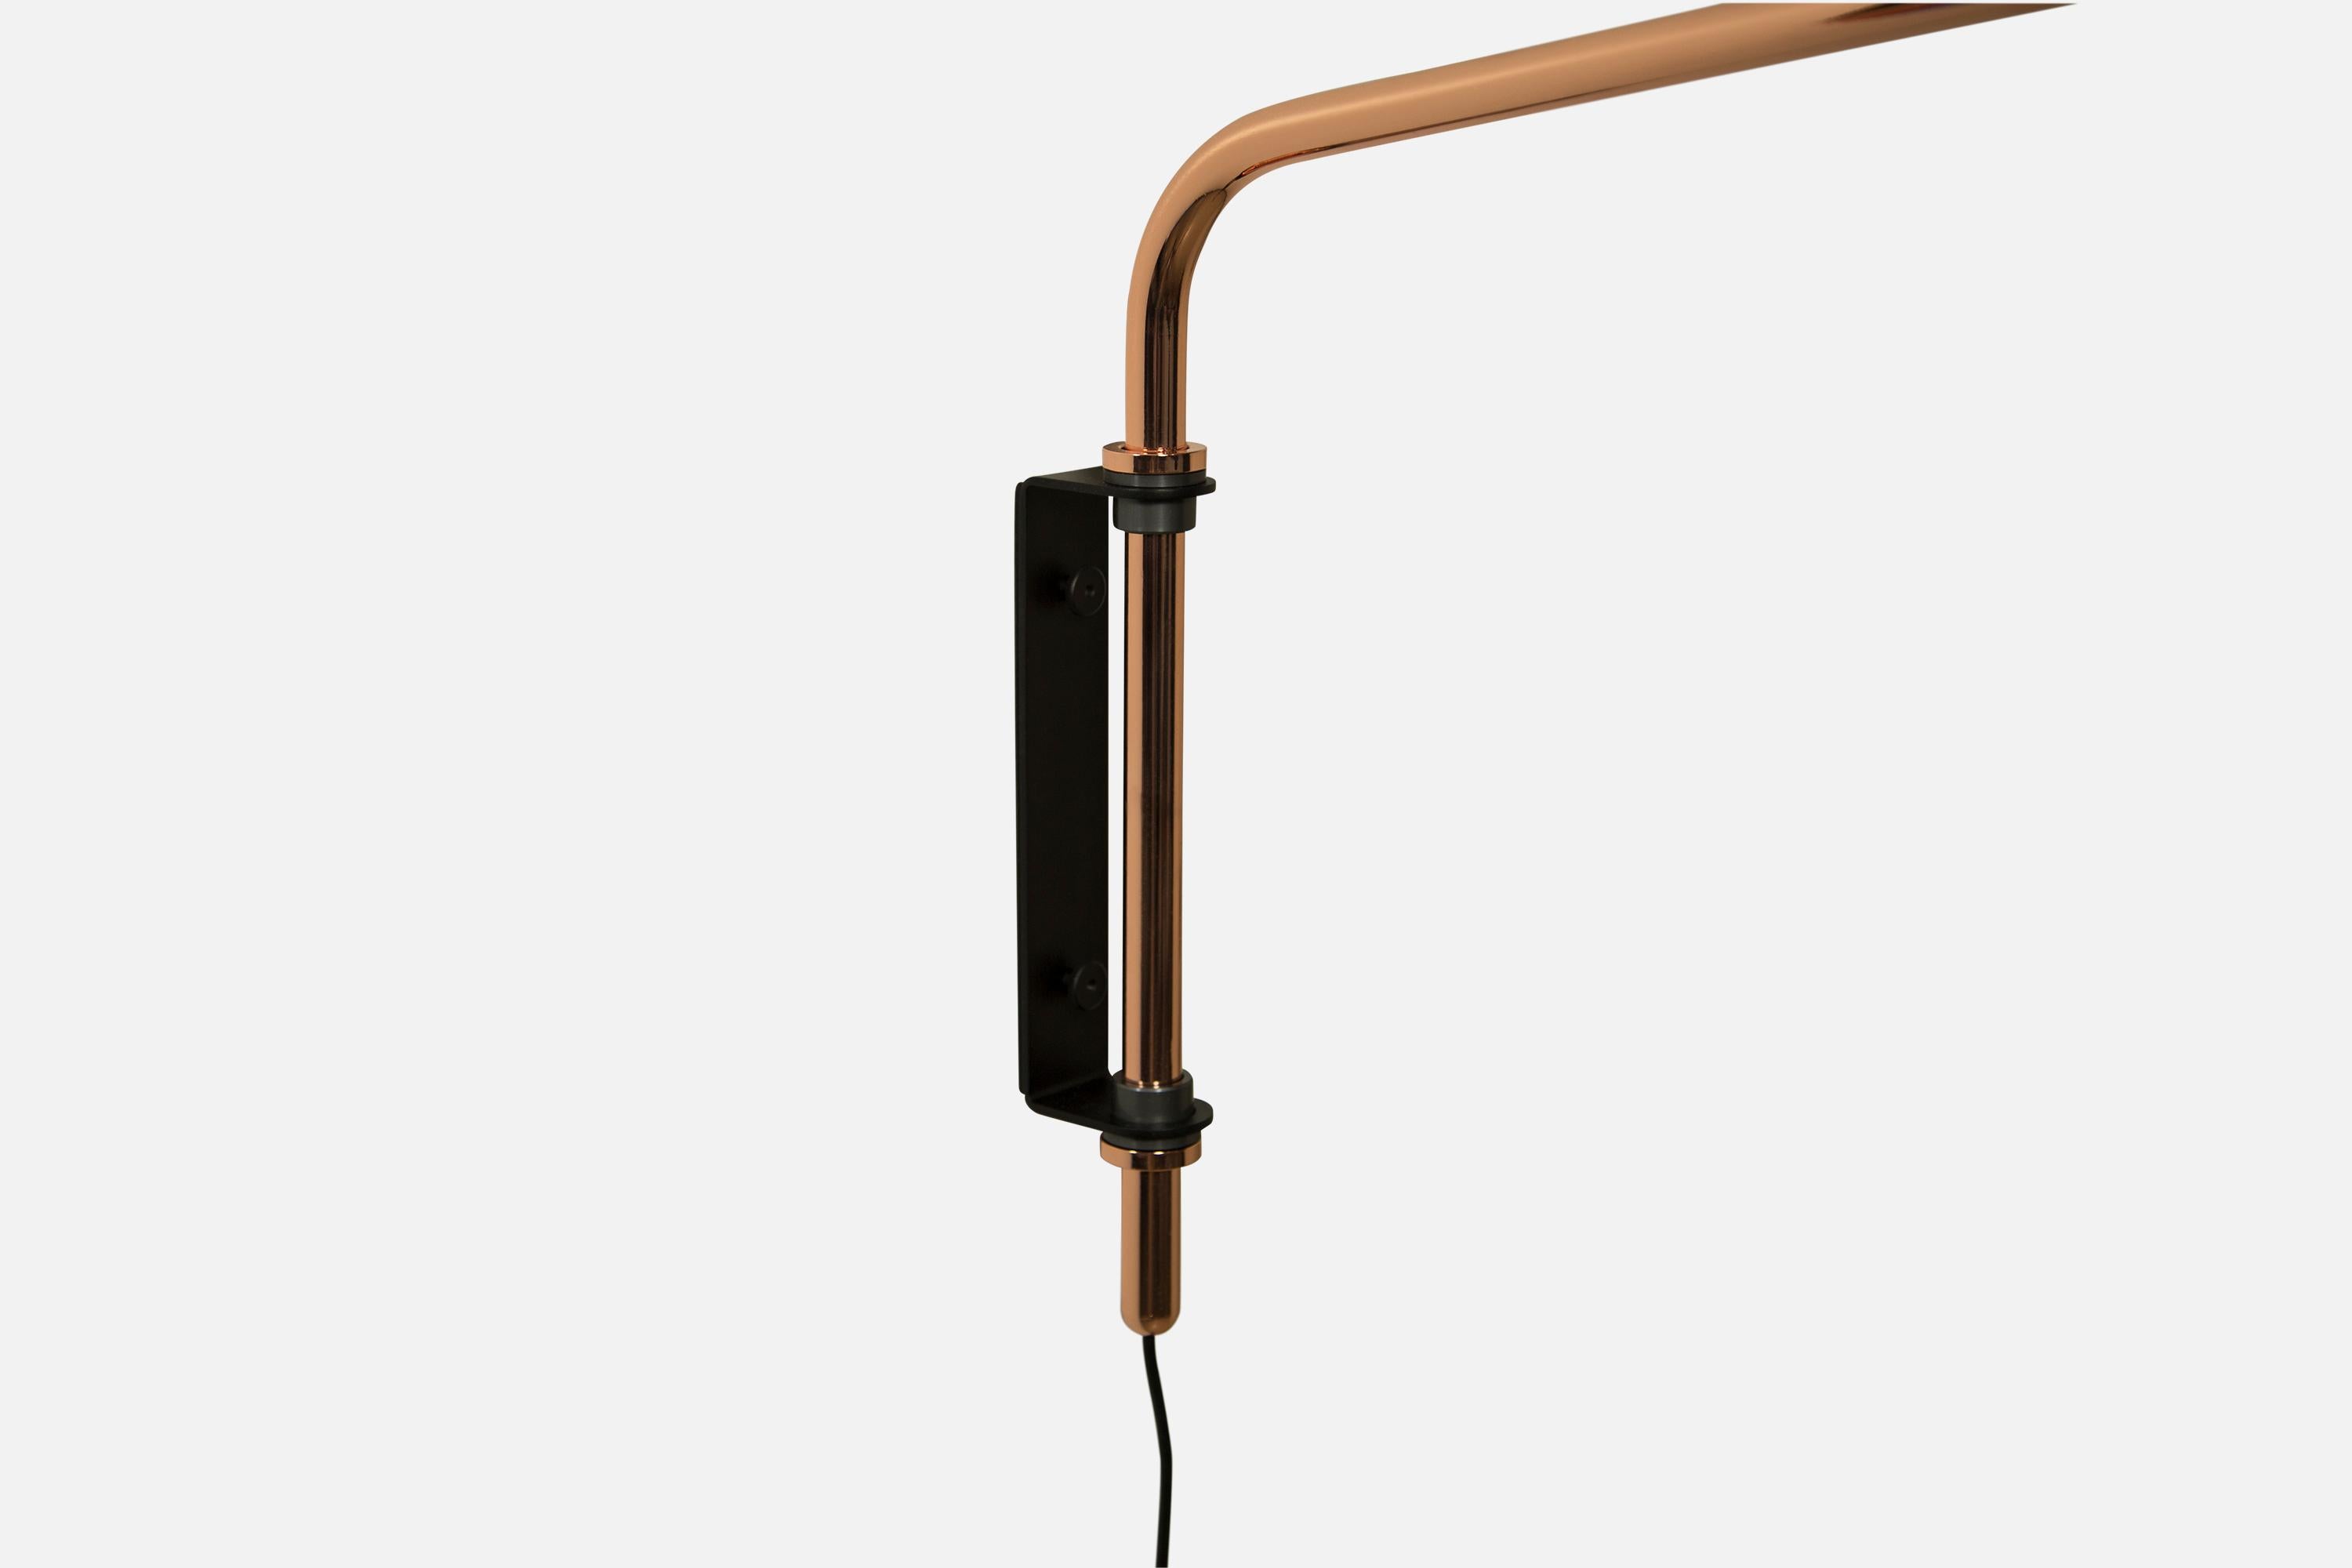 The Signal arm sconce is a rotatable sconce that seamlessly blend the Mid-Century Modern aesthetic with that of science fiction. A bent aluminium tube cantilevers from a wall-mounted bracket to allow the spun shade to hover above any interior.